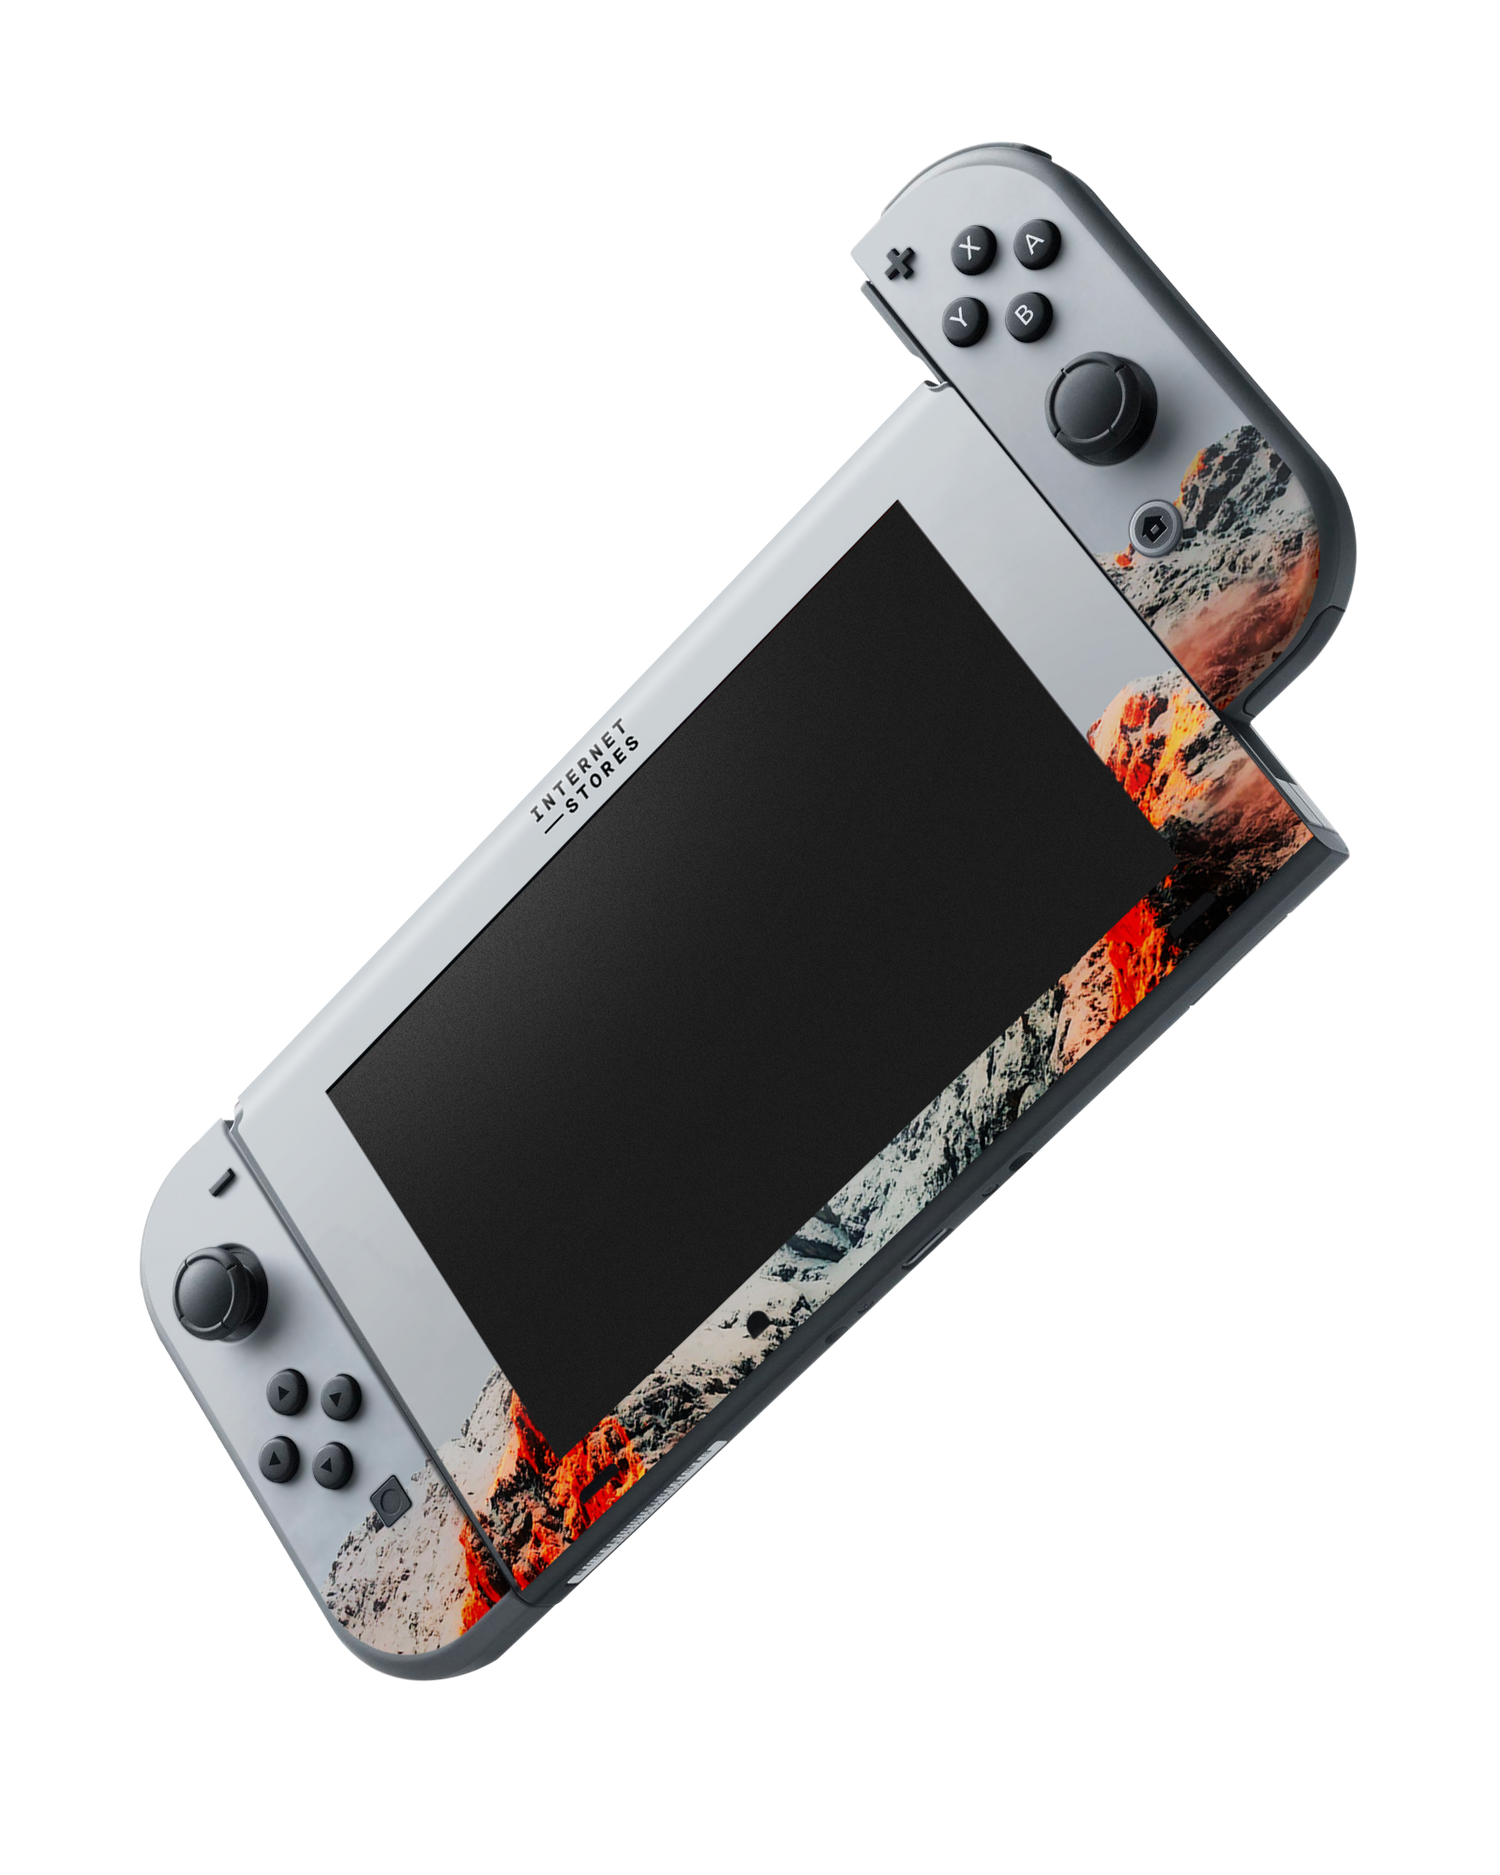 High Peak Console Skin for Nintendo Switch: Joy-Con removing 